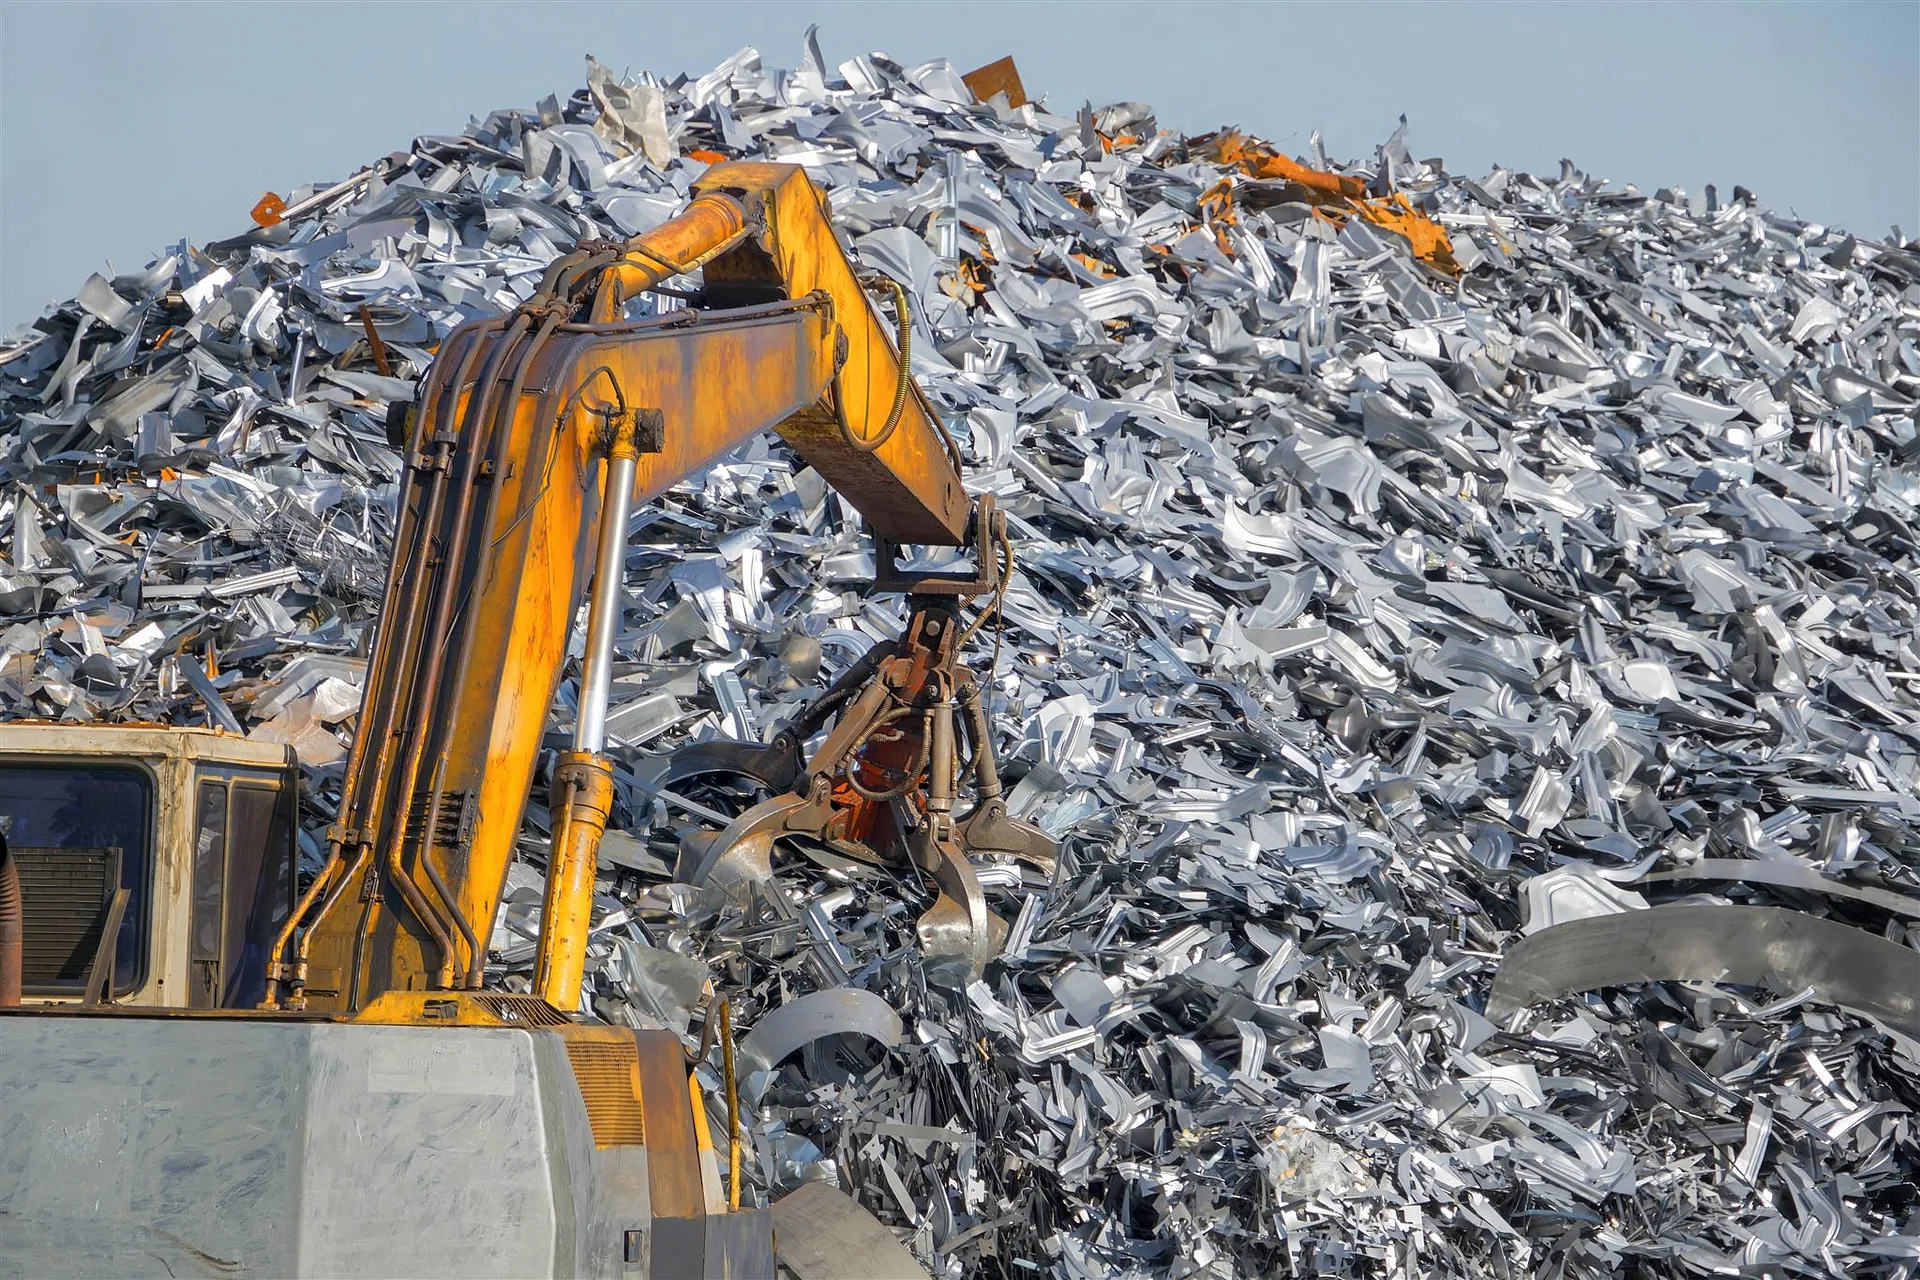 SCRAP METAL: An Overview of Its Uses and Recycling Process